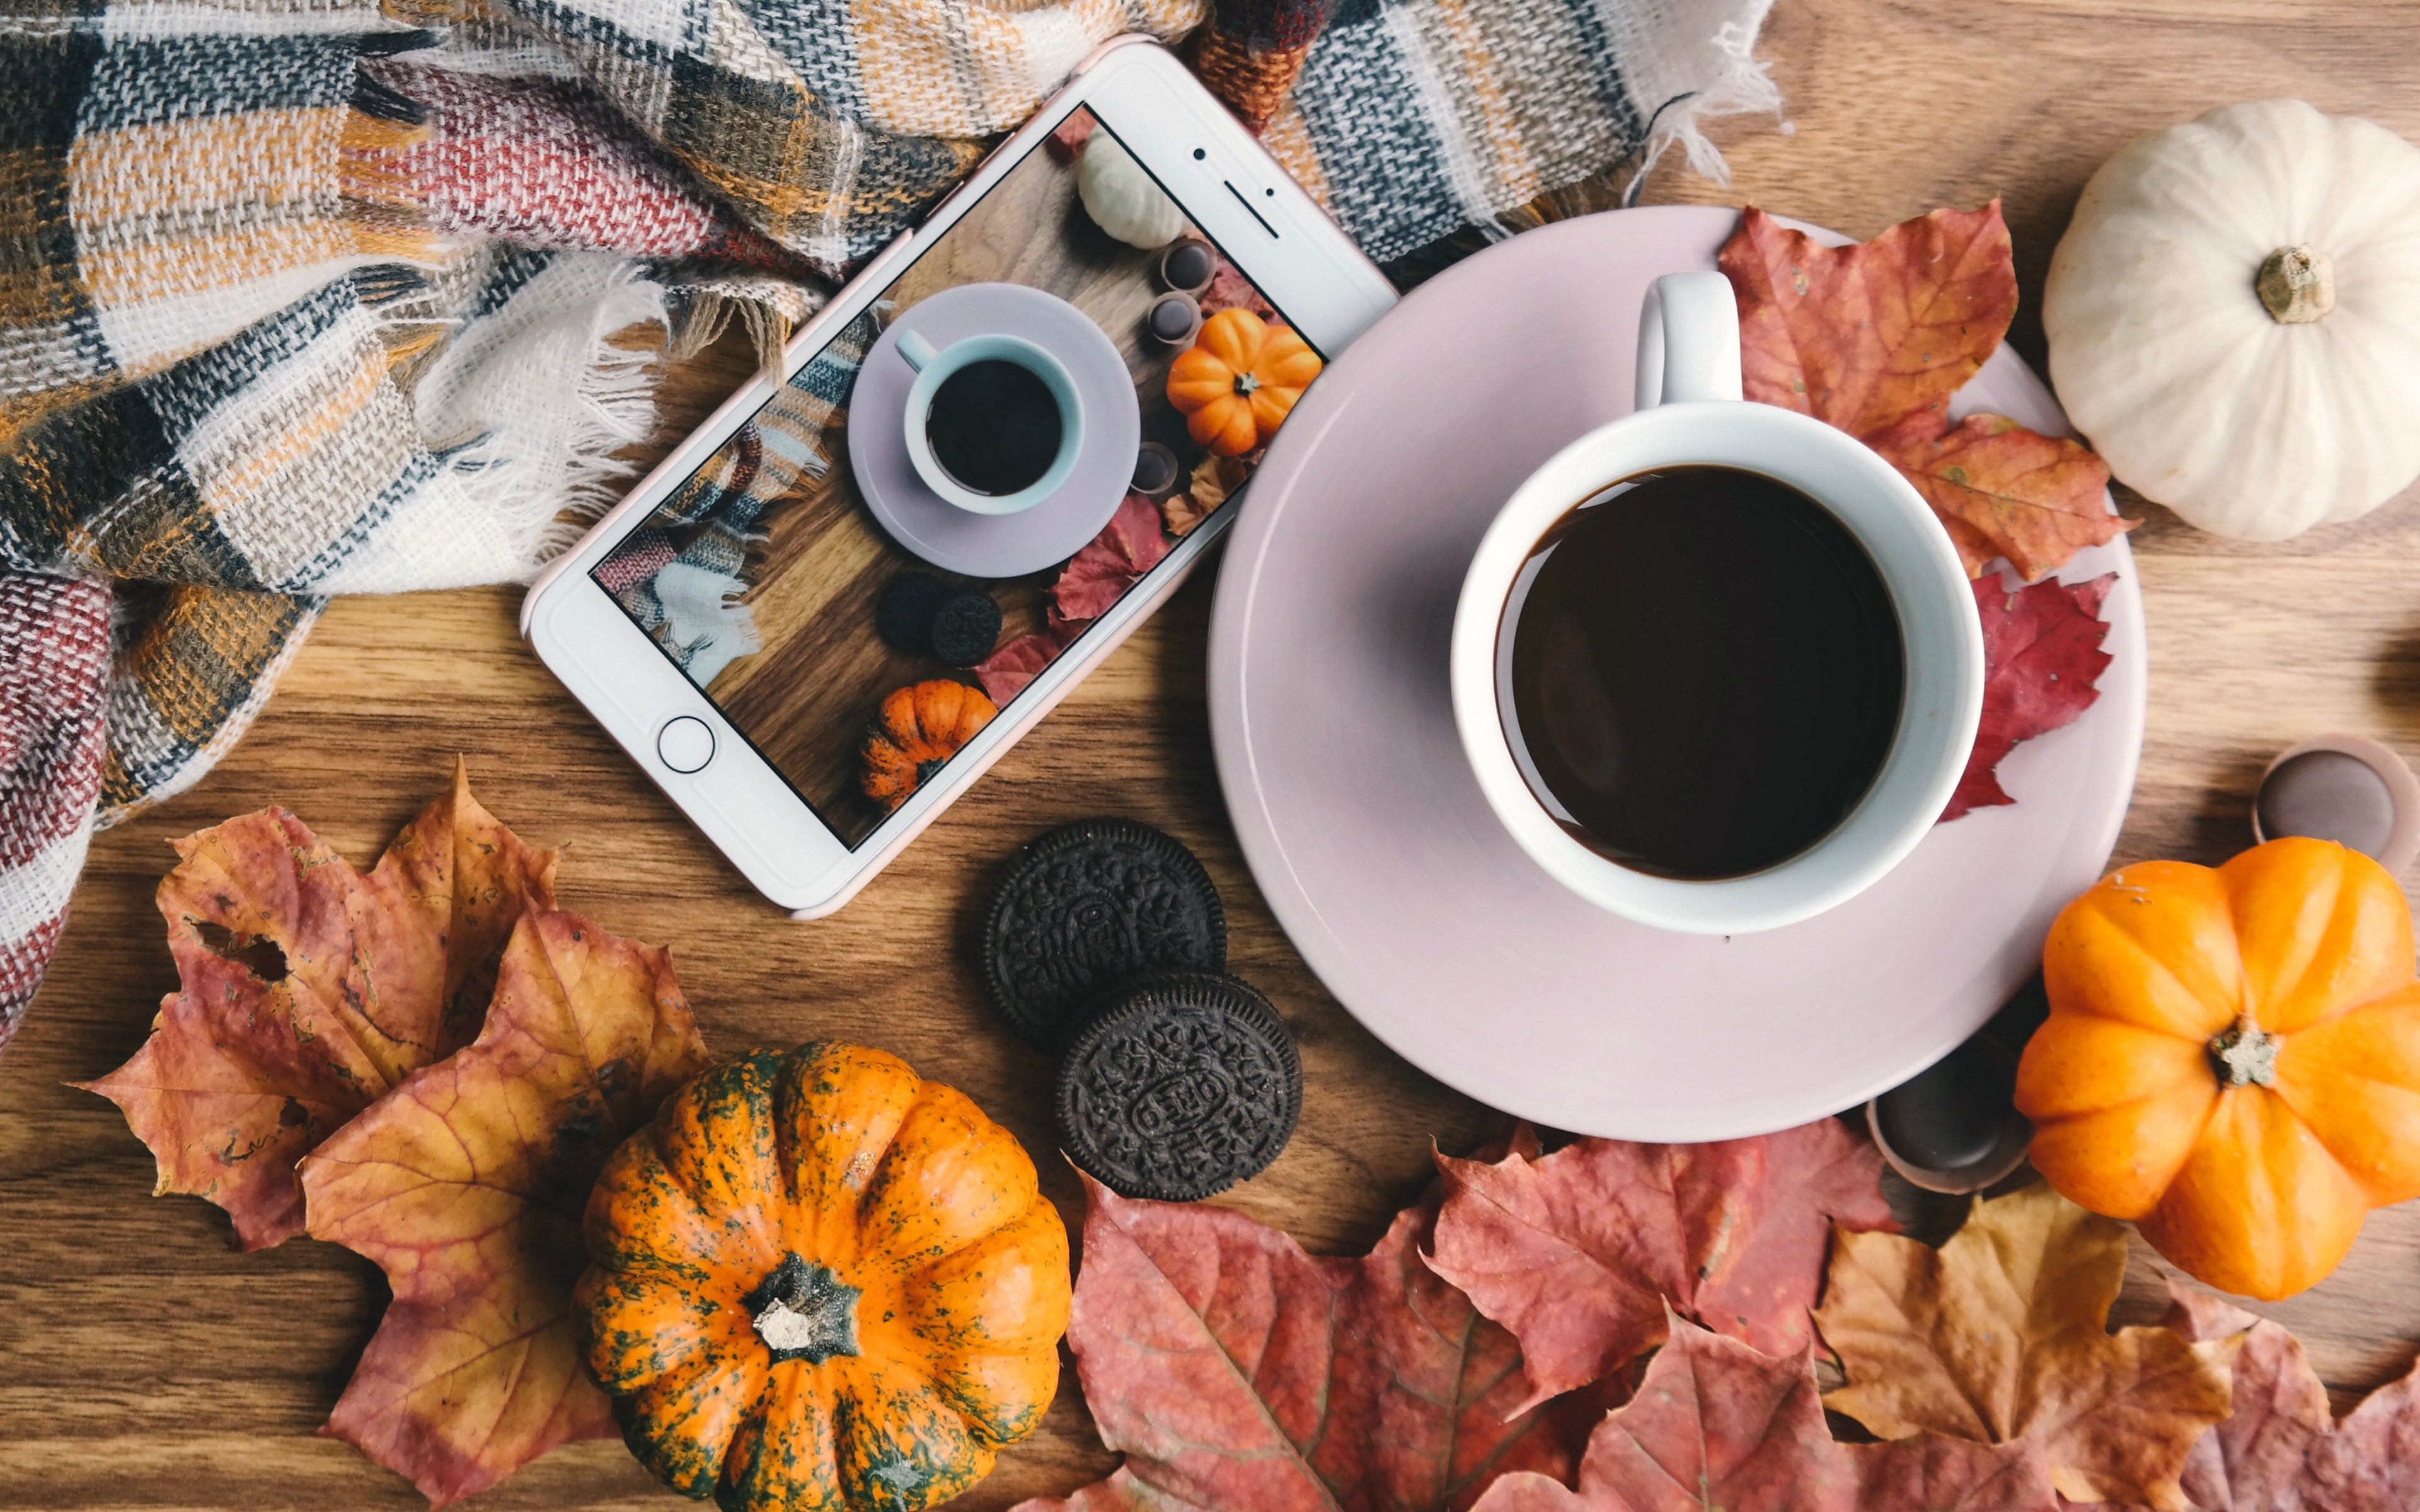 Autumn Coffee Wallpapers